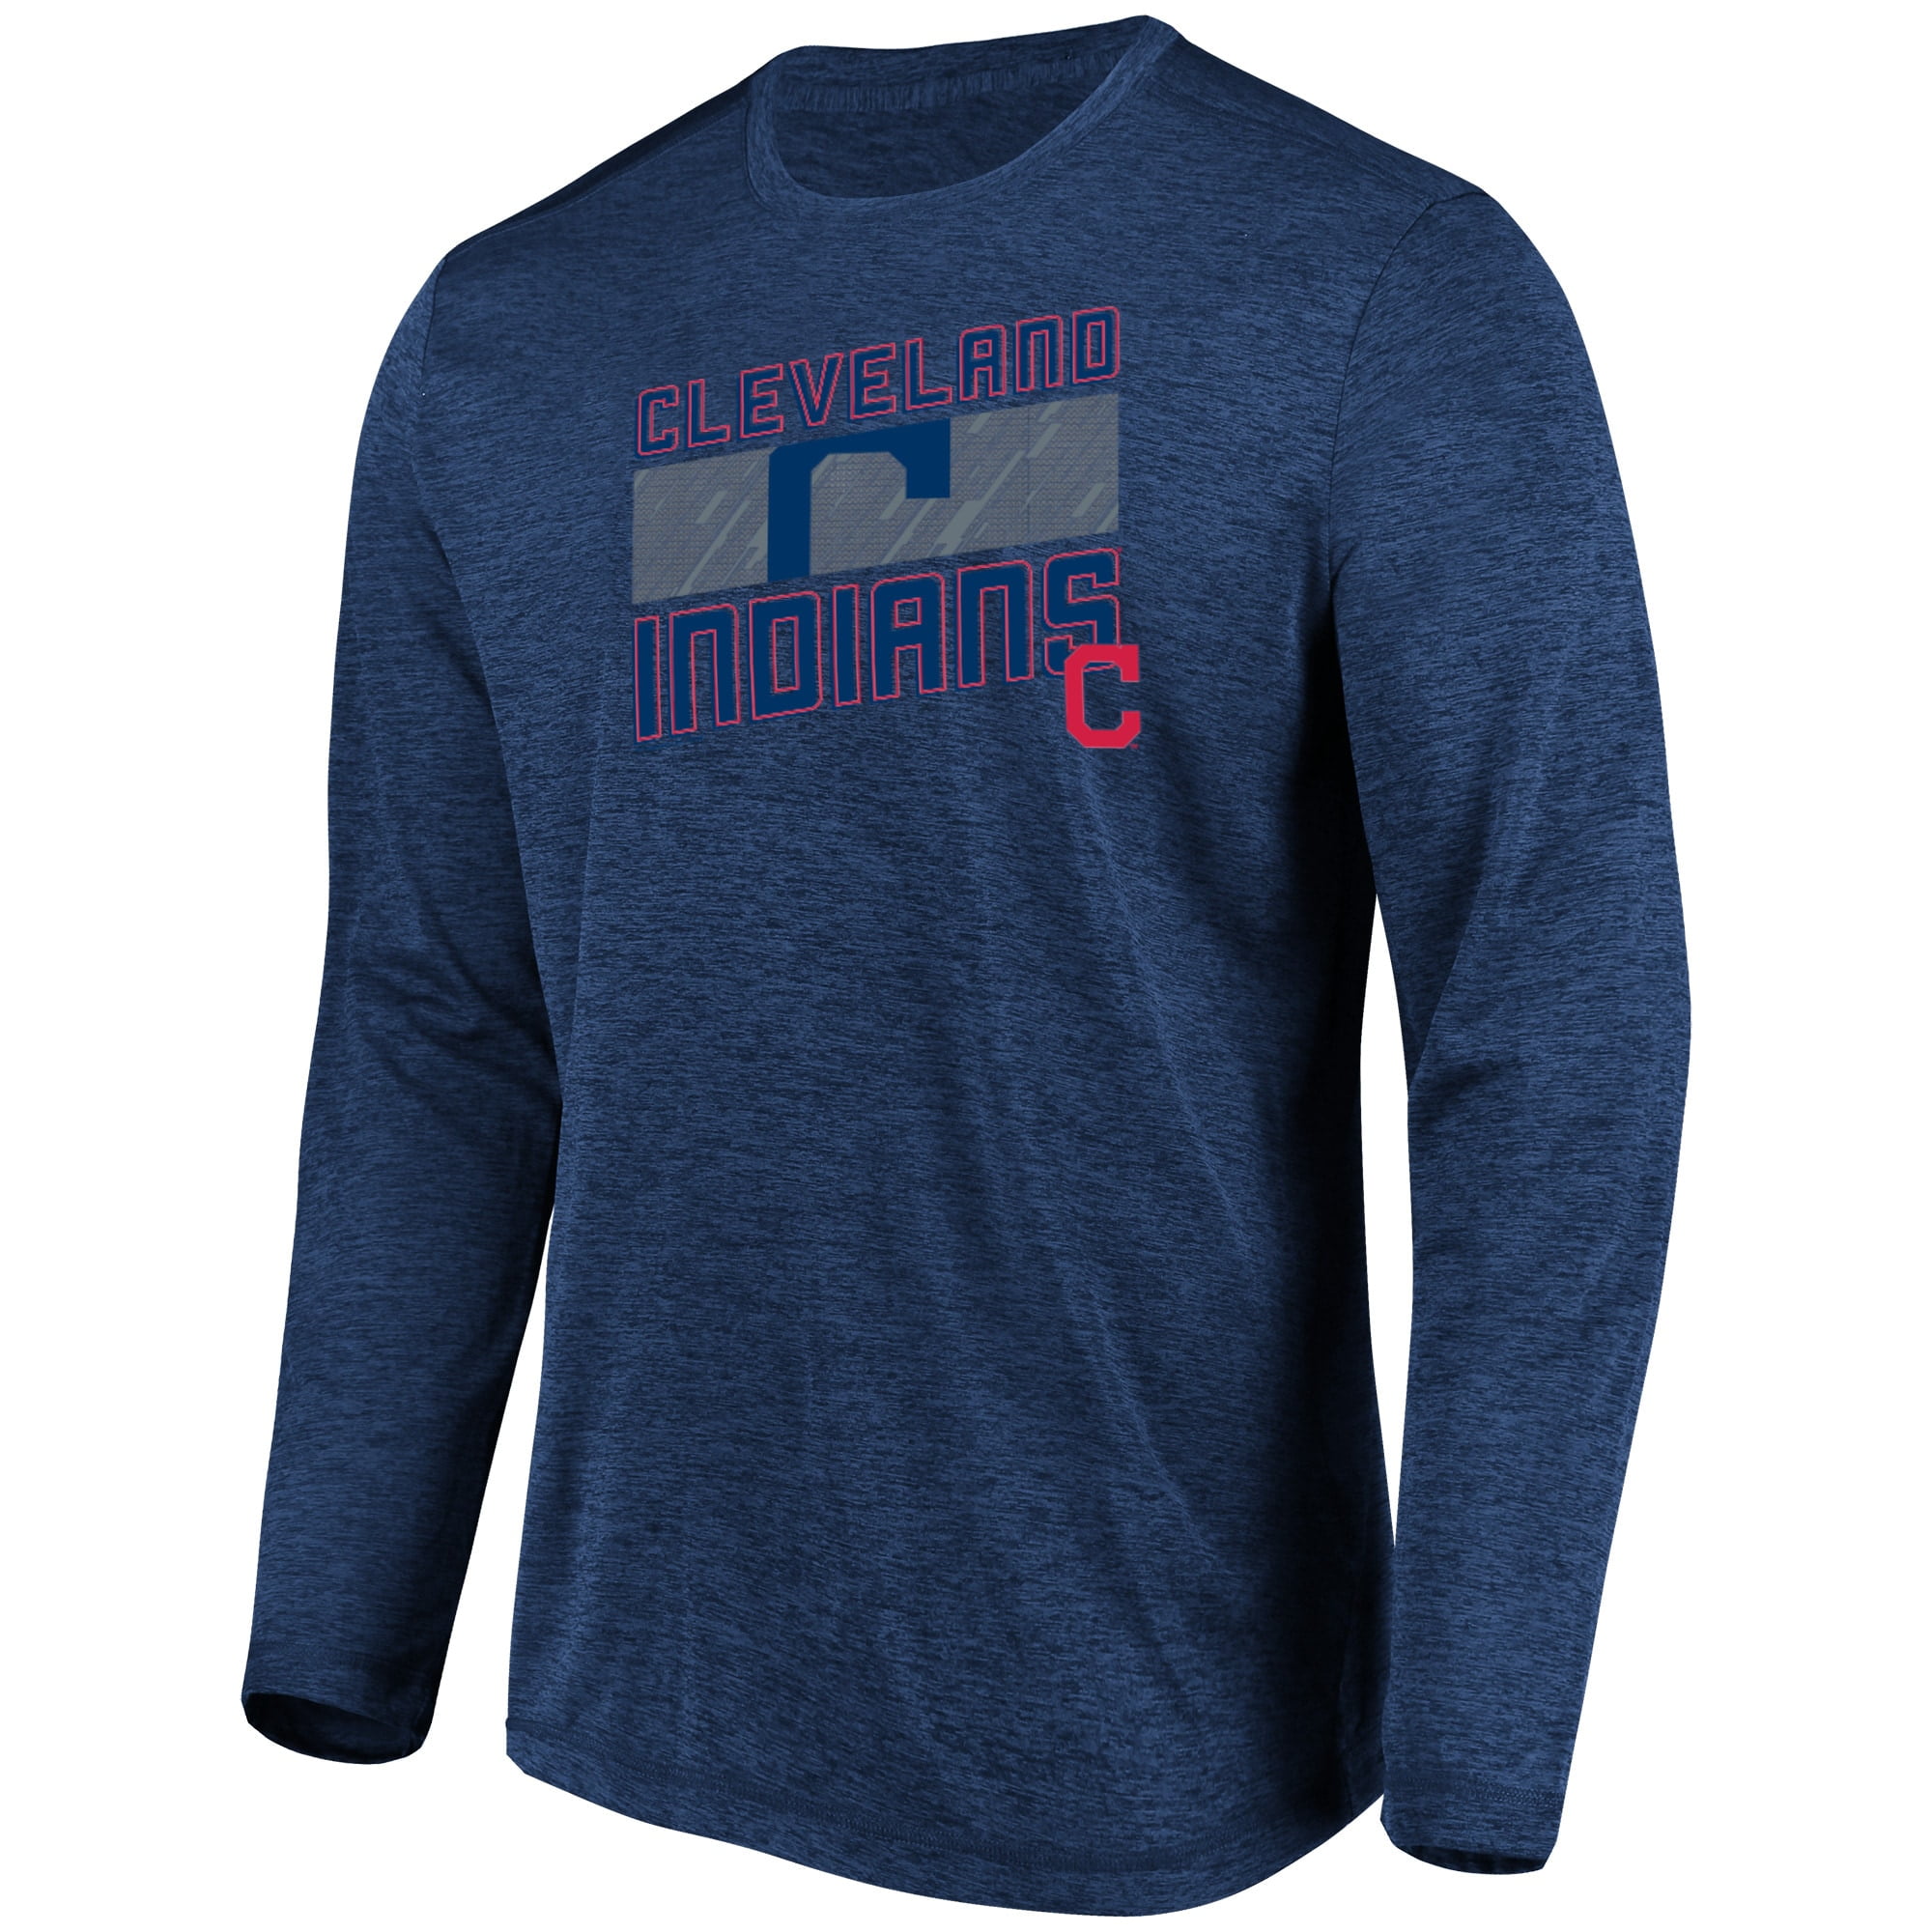 Men's Majestic Heathered Navy Cleveland Indians Big & Tall Long Sleeve ...